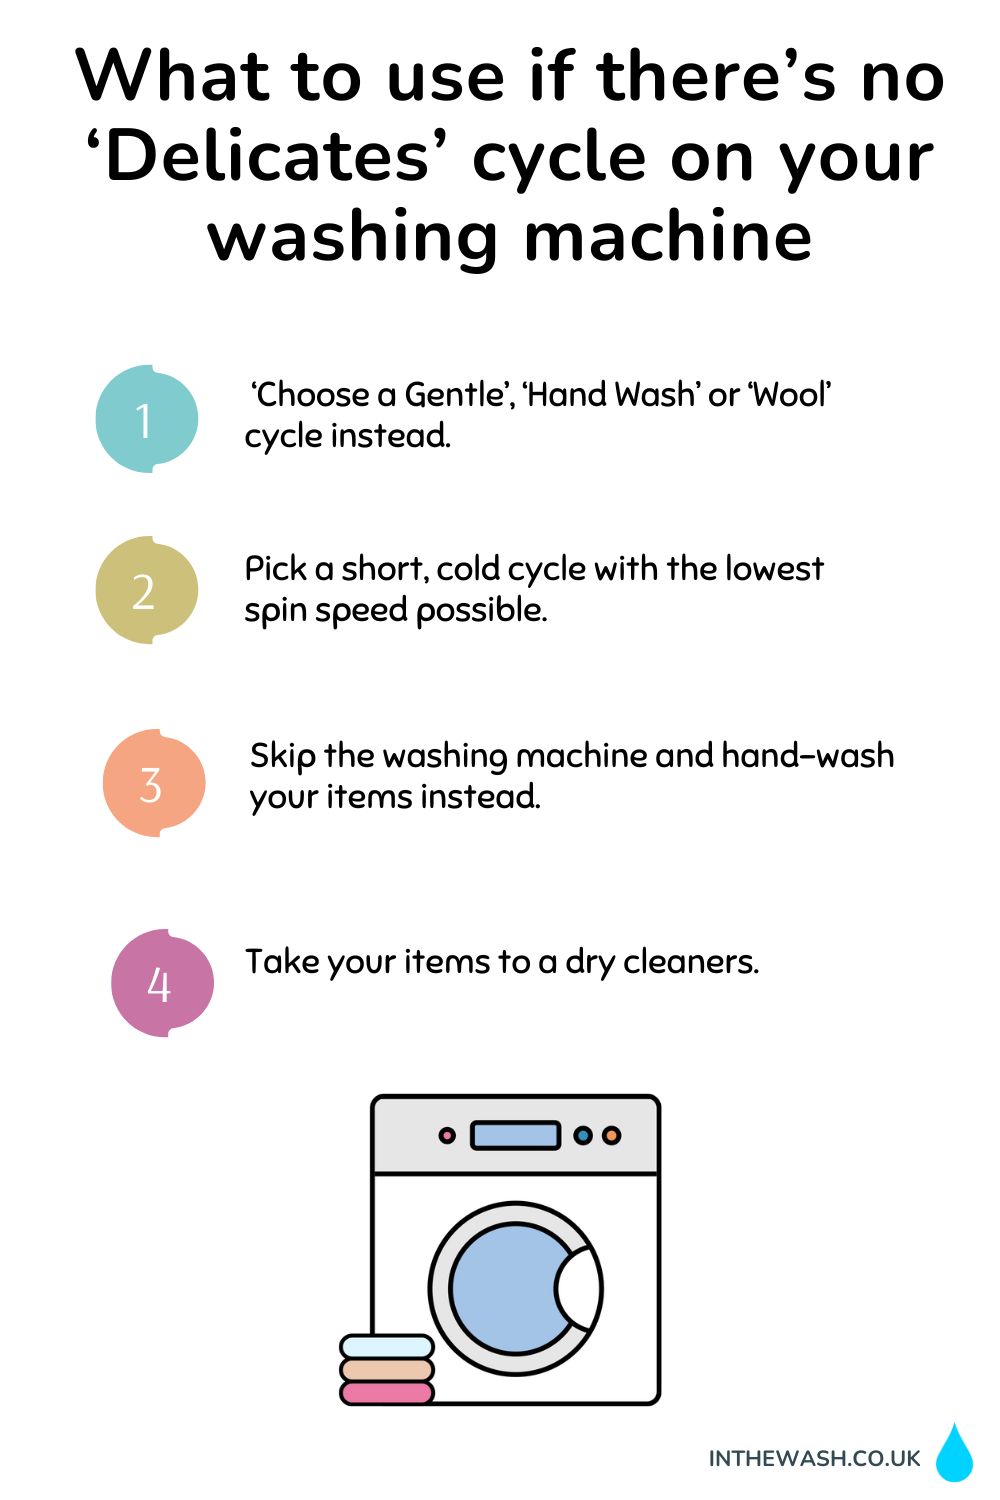 What to use if there's no delicates cycle on your washing machine